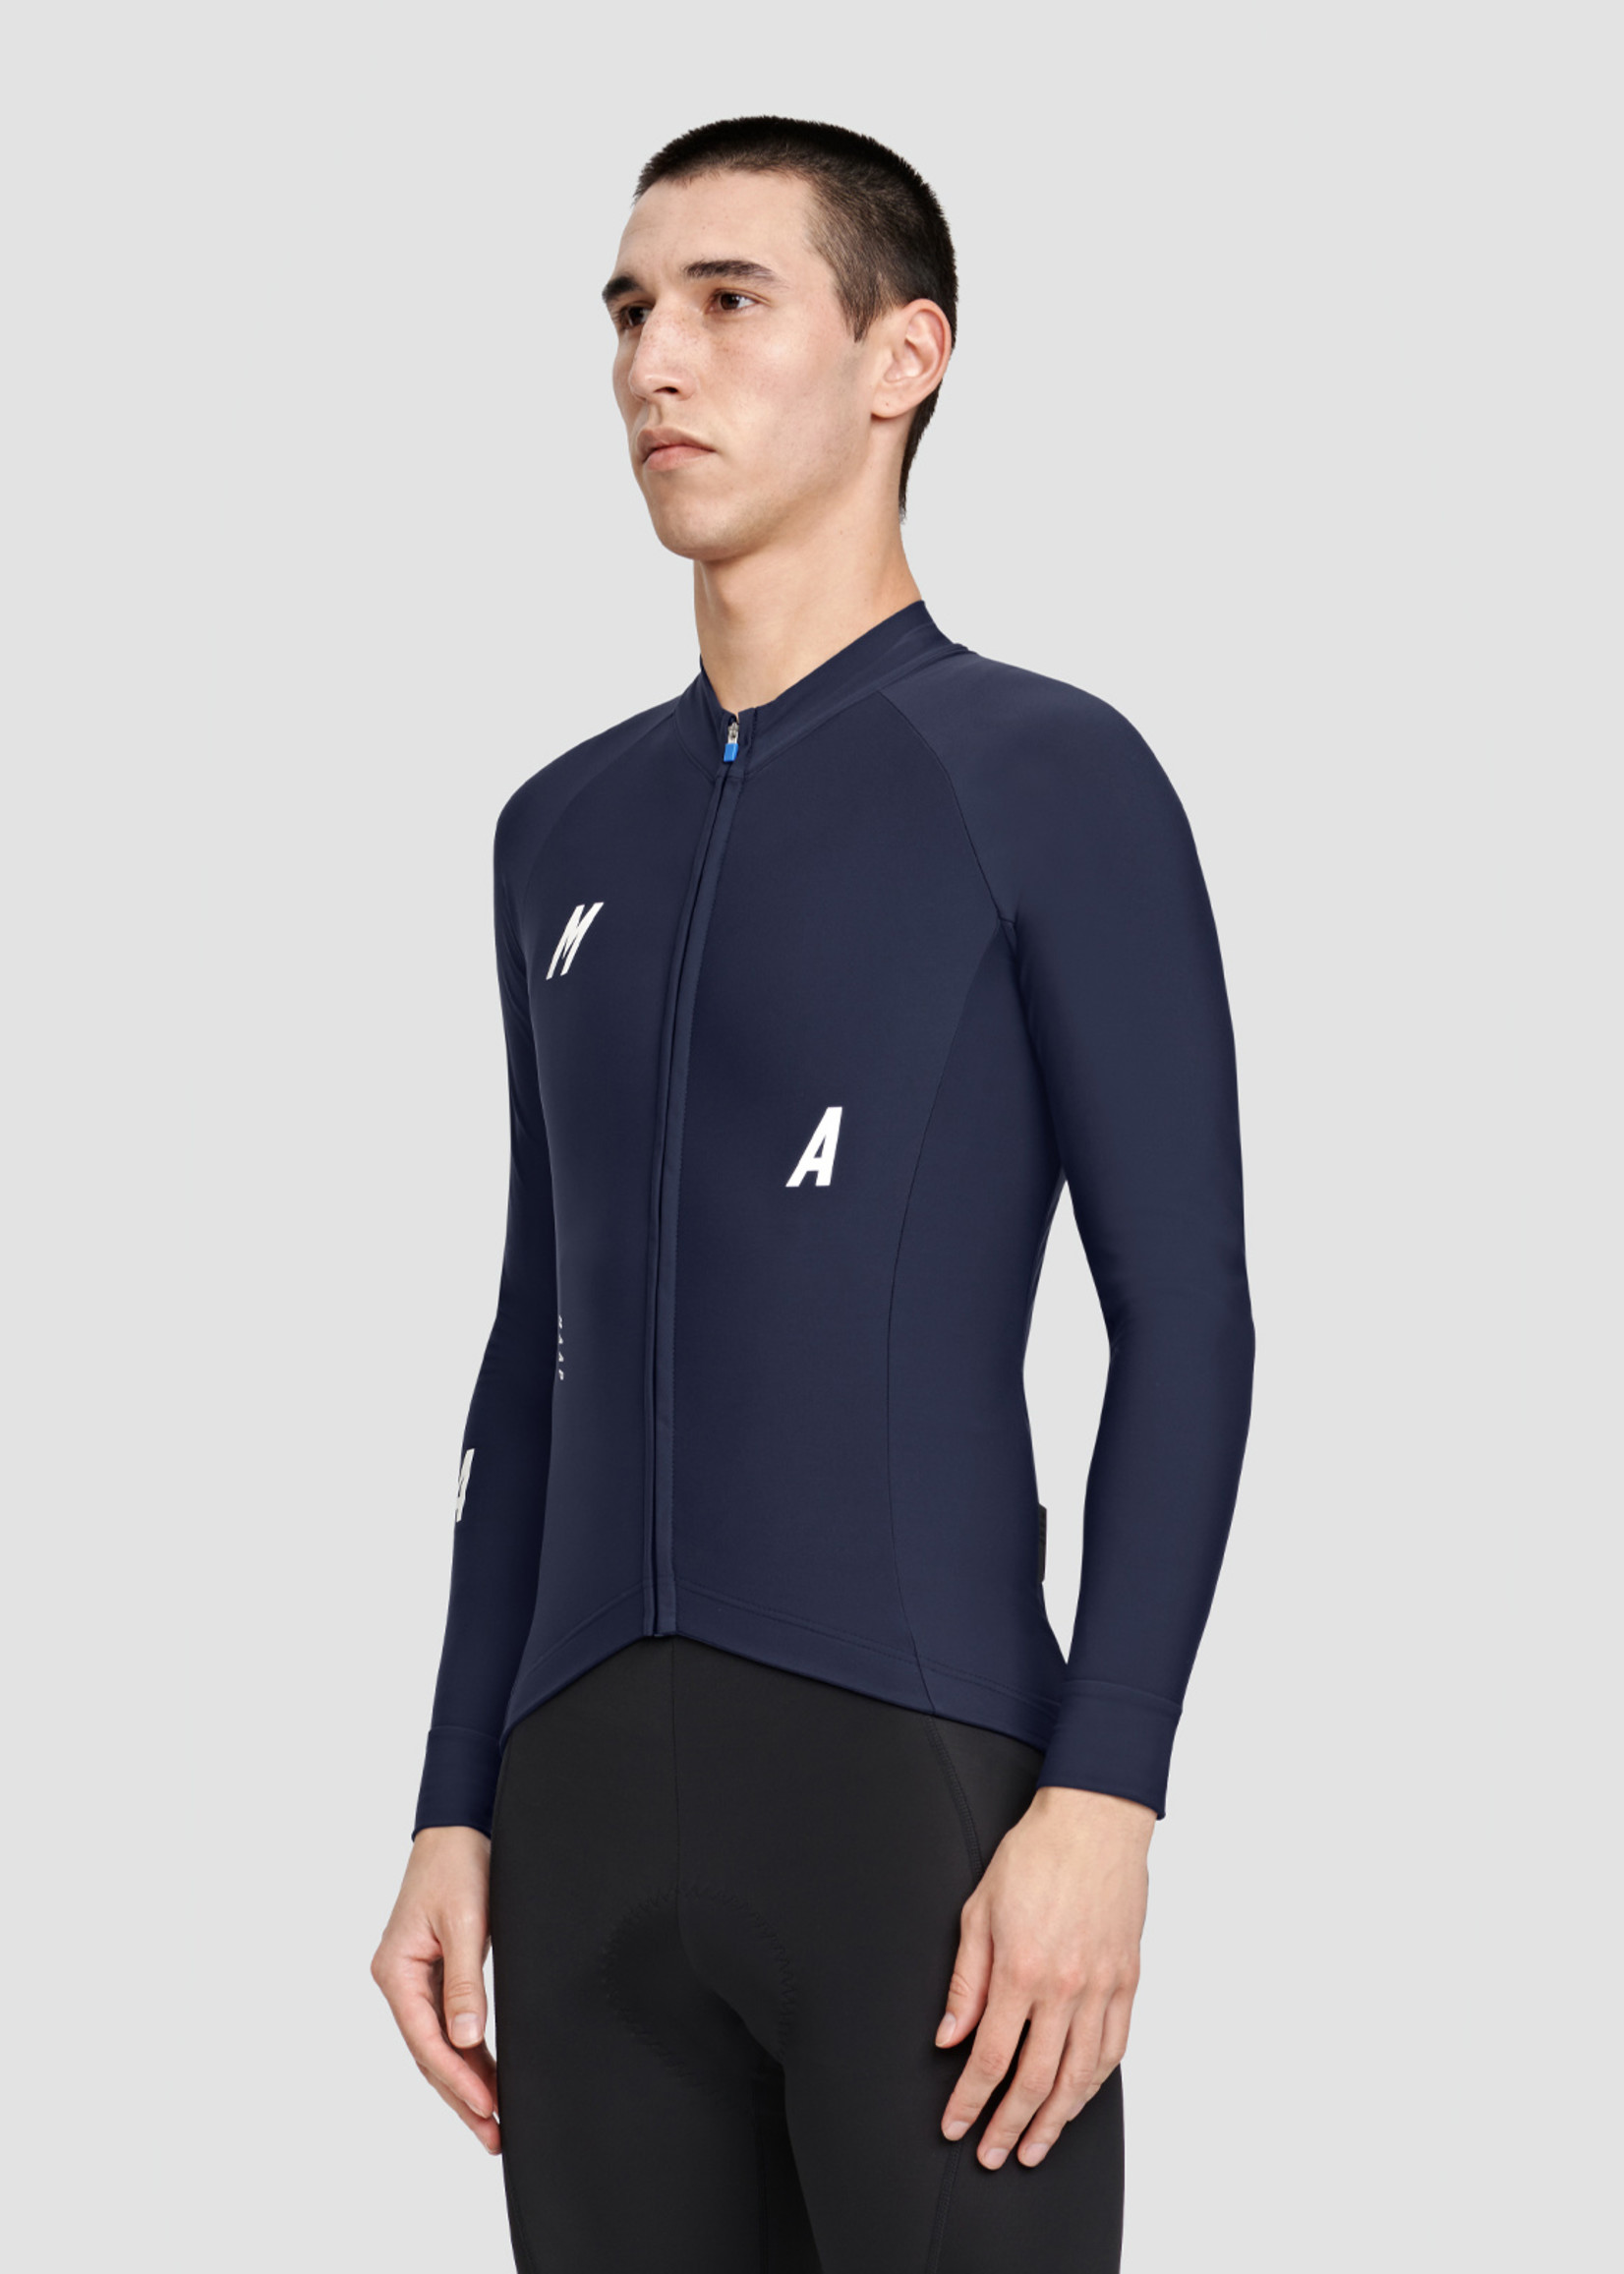 Maap Training Thermal LS Jersey - Navy